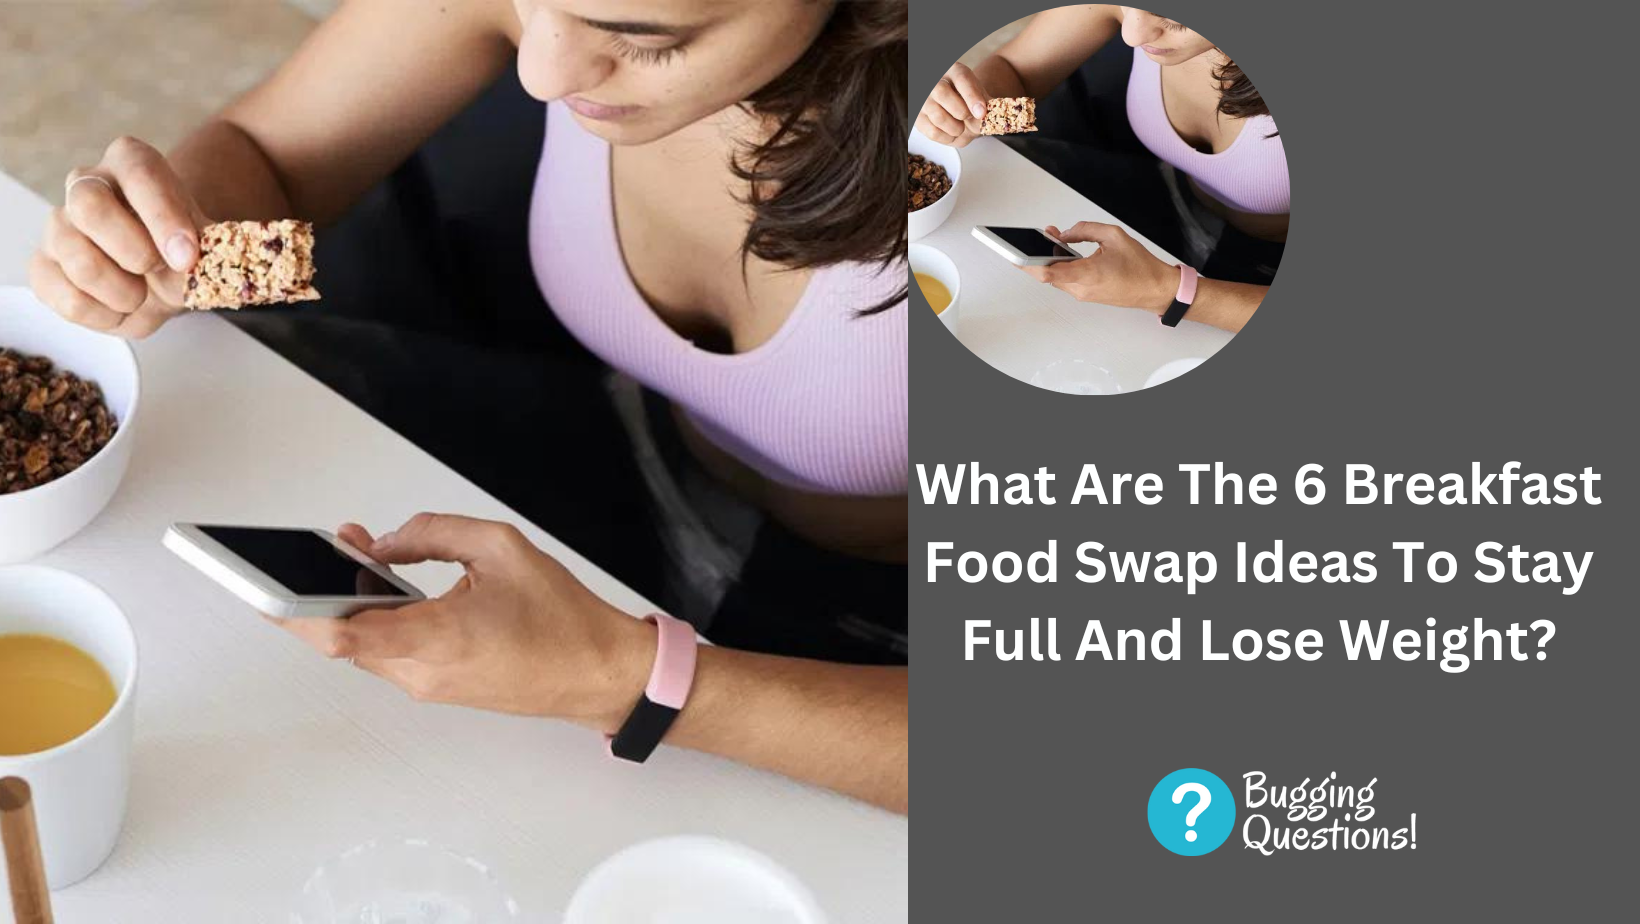 What Are The 6 Breakfast Food Swap Ideas To Stay Full And Lose Weight?